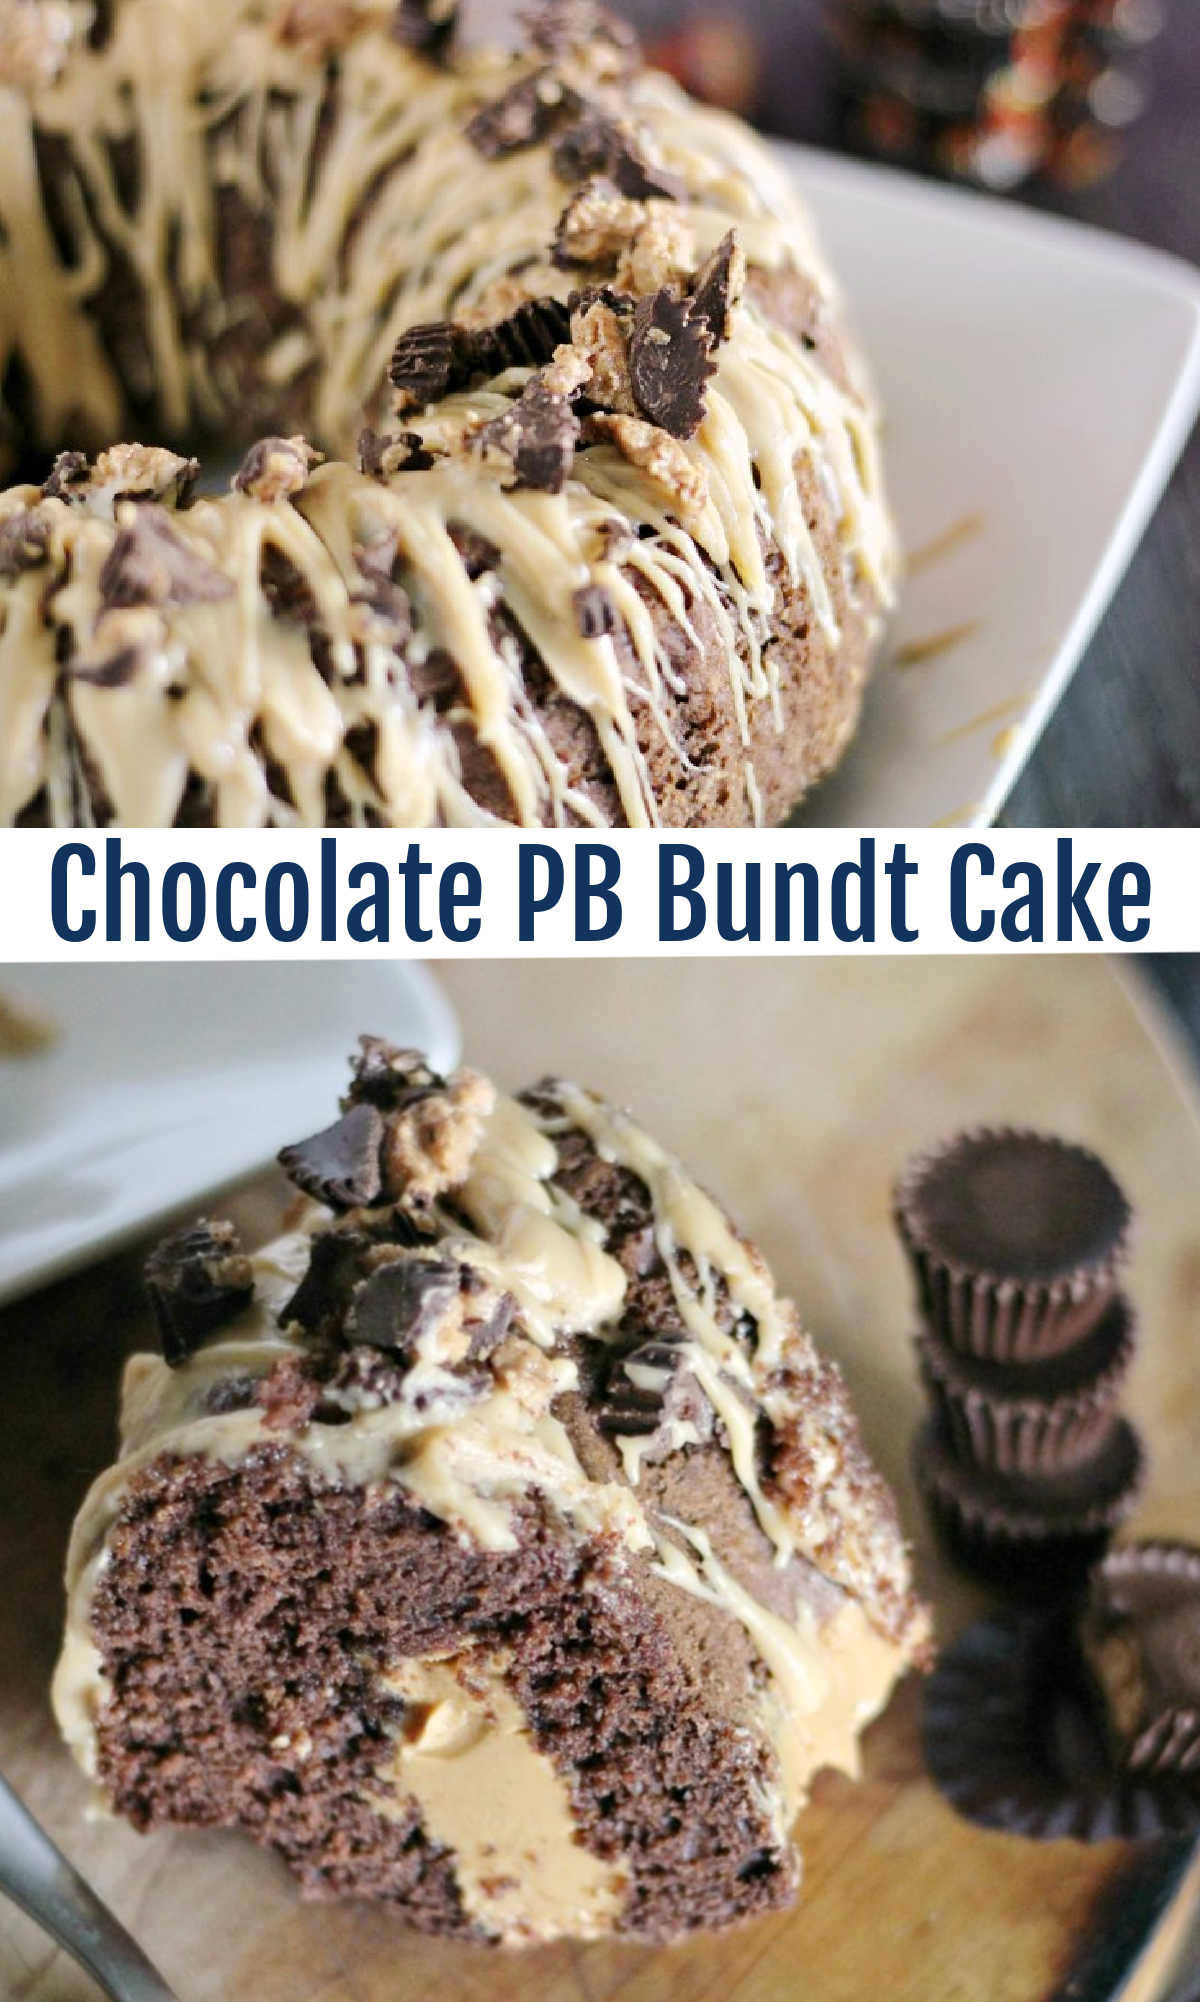 Enjoy the classic chocolate and peanut butter Reese’s peanut butter cup combo in bundt cake form. This poke cake is easy to make and will leave a lasting impression!